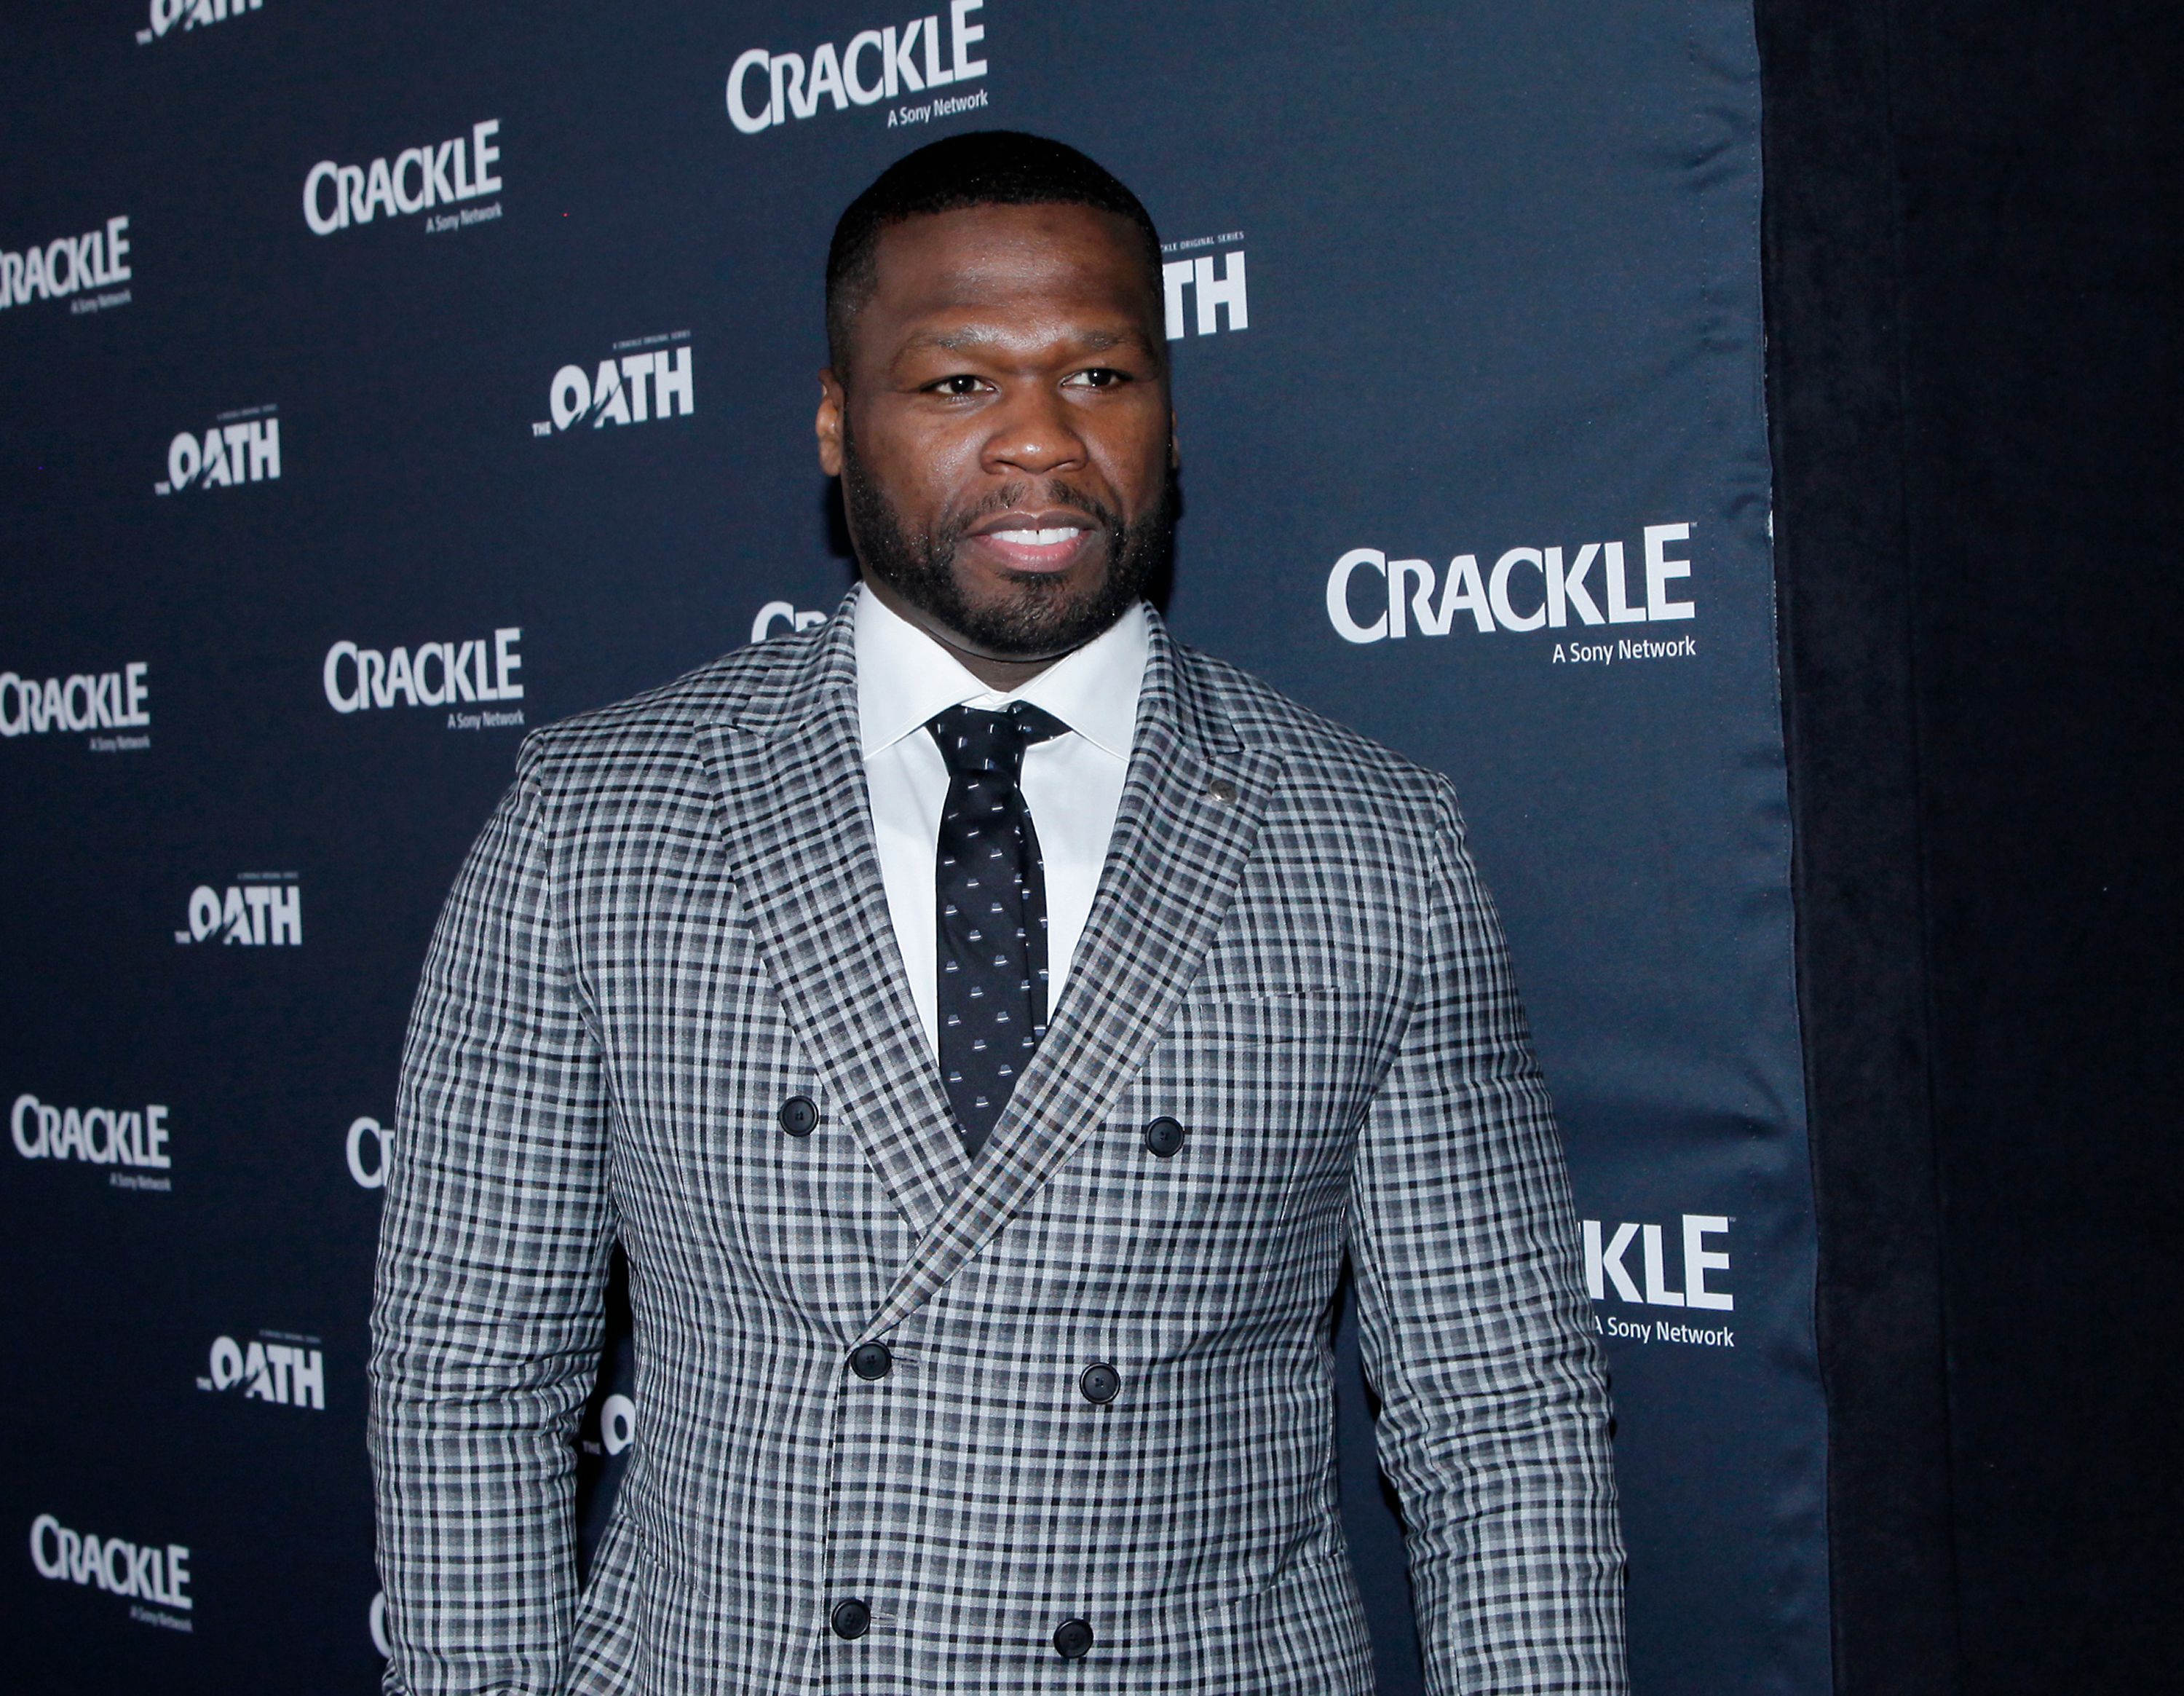 50 Cent at the premiere of Crackle's 'The Oath' at Sony Pictures Studios on March 7, 2018 | Photo: Getty Images